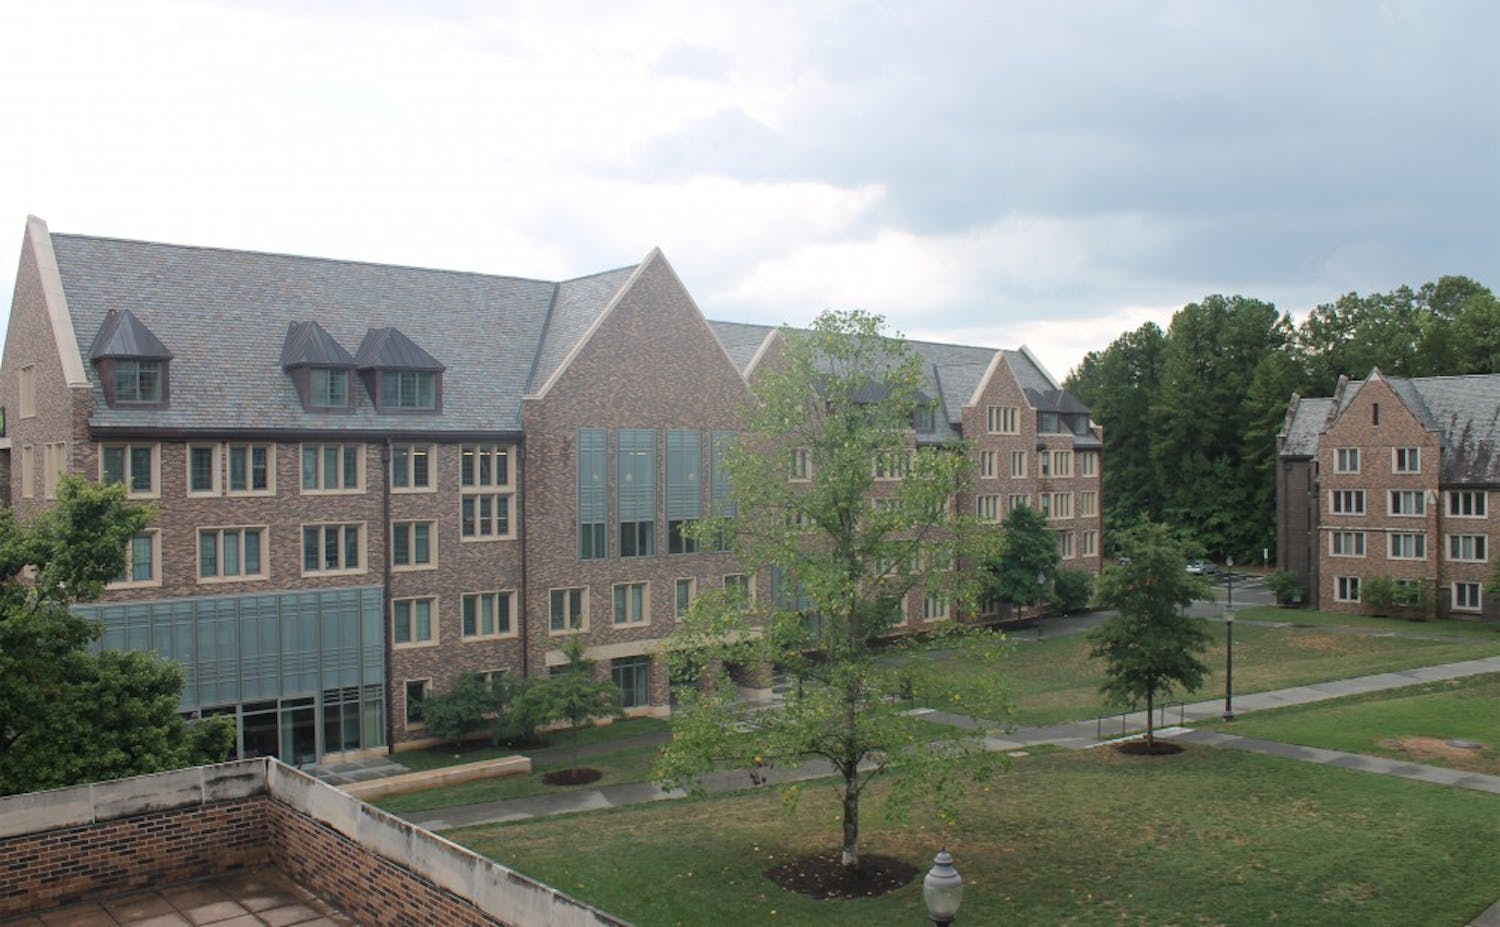 Keohane Quadrangle was one of the sites of burglaries that occurred during upperclassmen move-in. DUPD recently arrested three men after investigations.